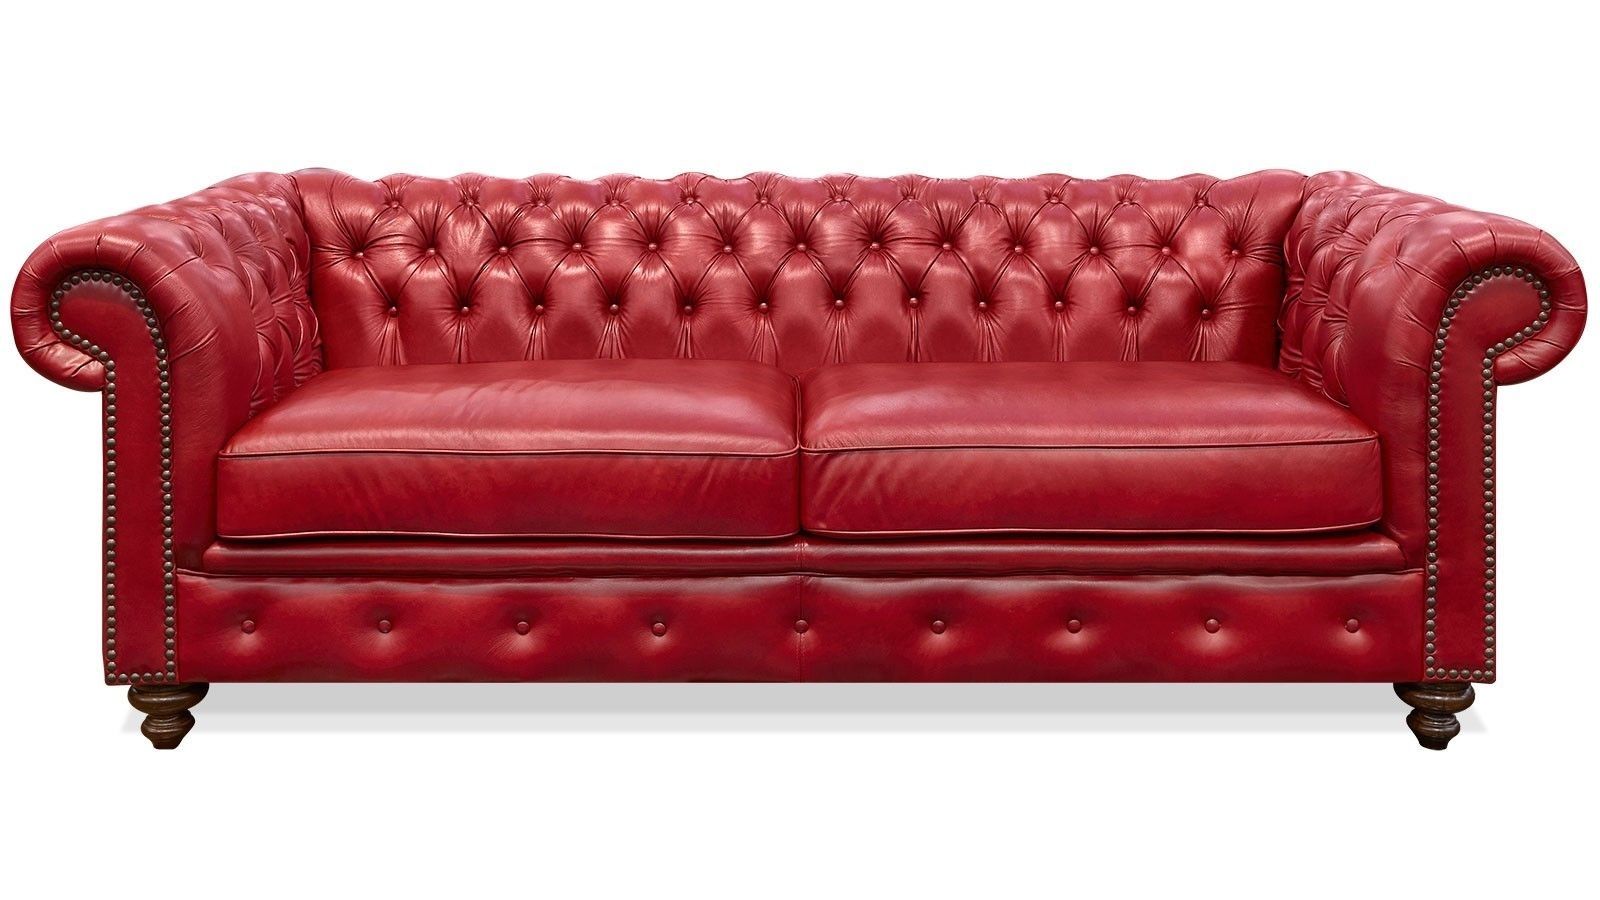 Astonishing Image Of Elegant Red Leather Sofa In A Living Room Bie Pertaining To Red Leather Sofas (View 5 of 10)